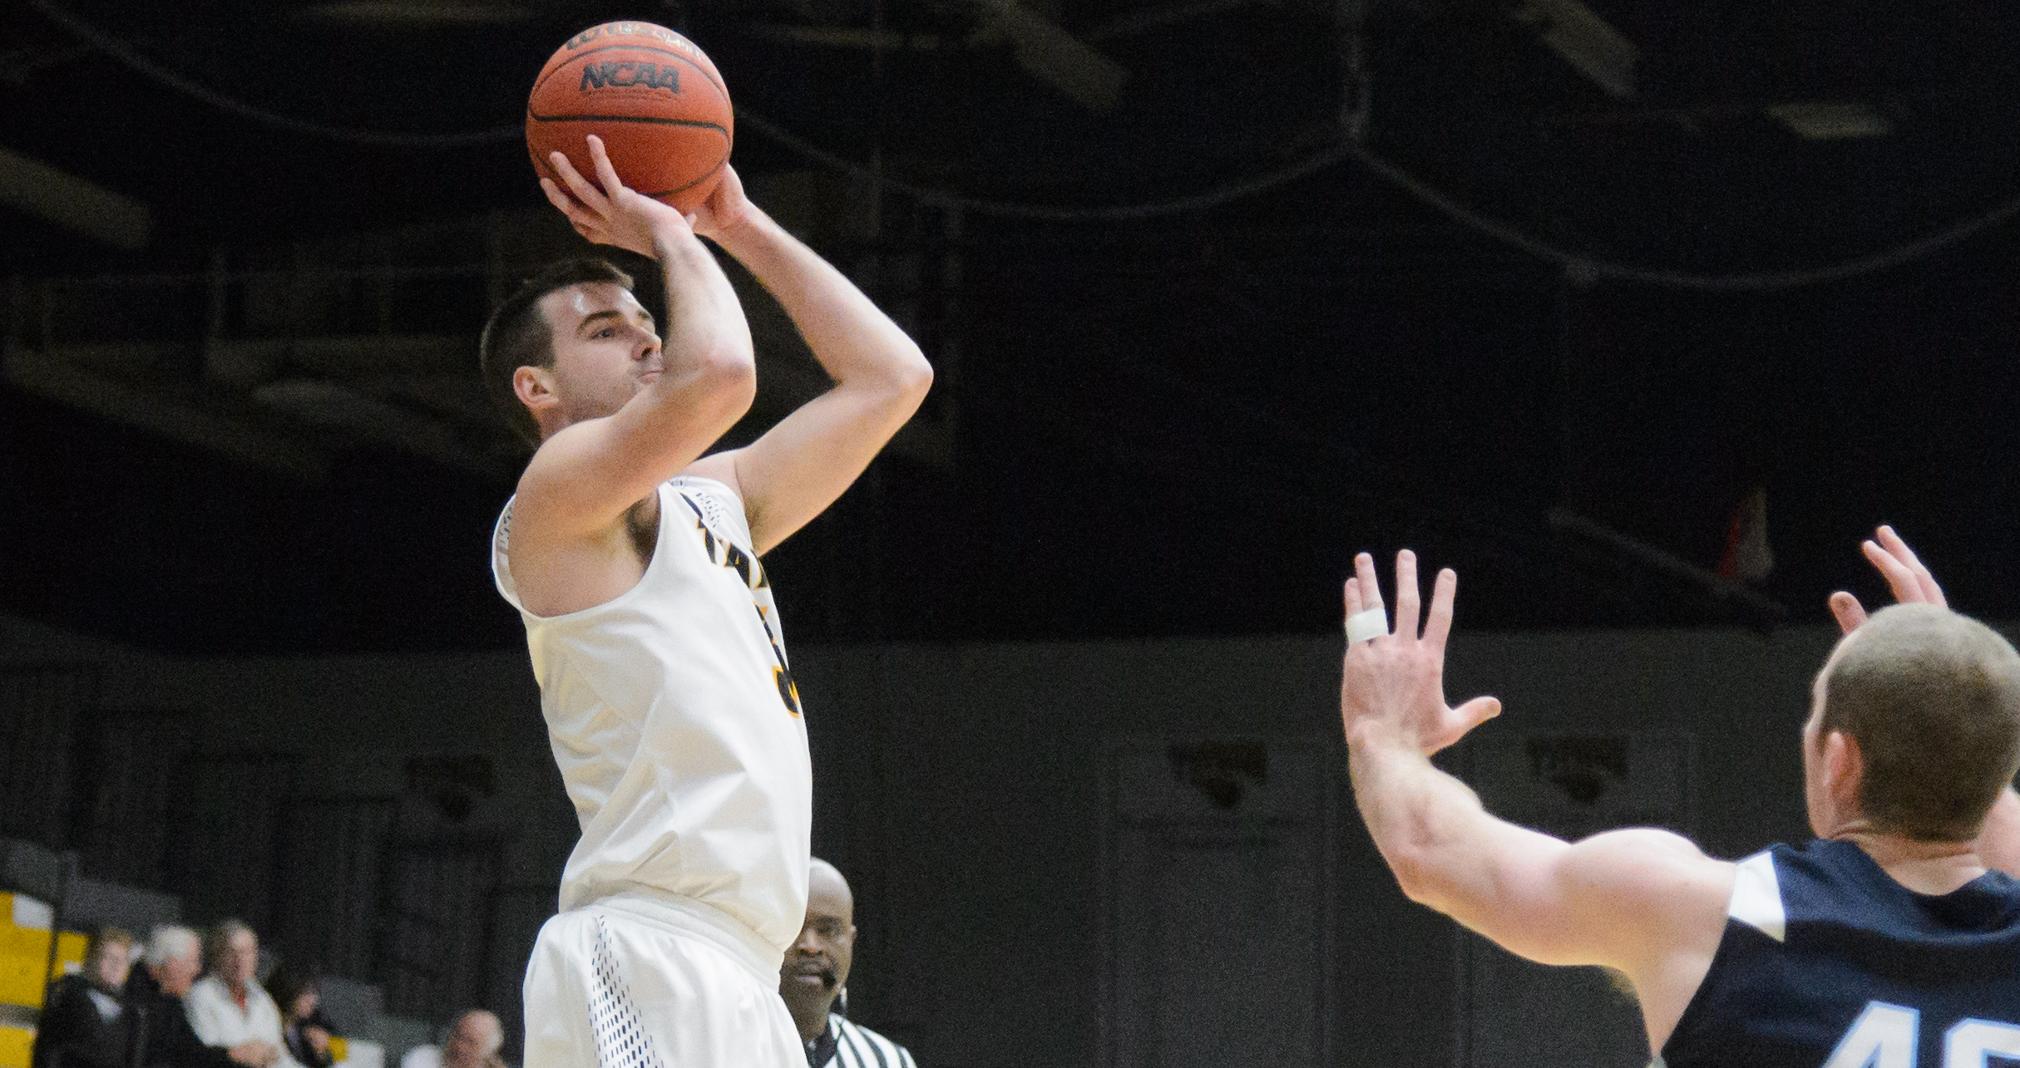 Alex Olson scored 13 points, including a game-winning jump shot with 21 seconds left.